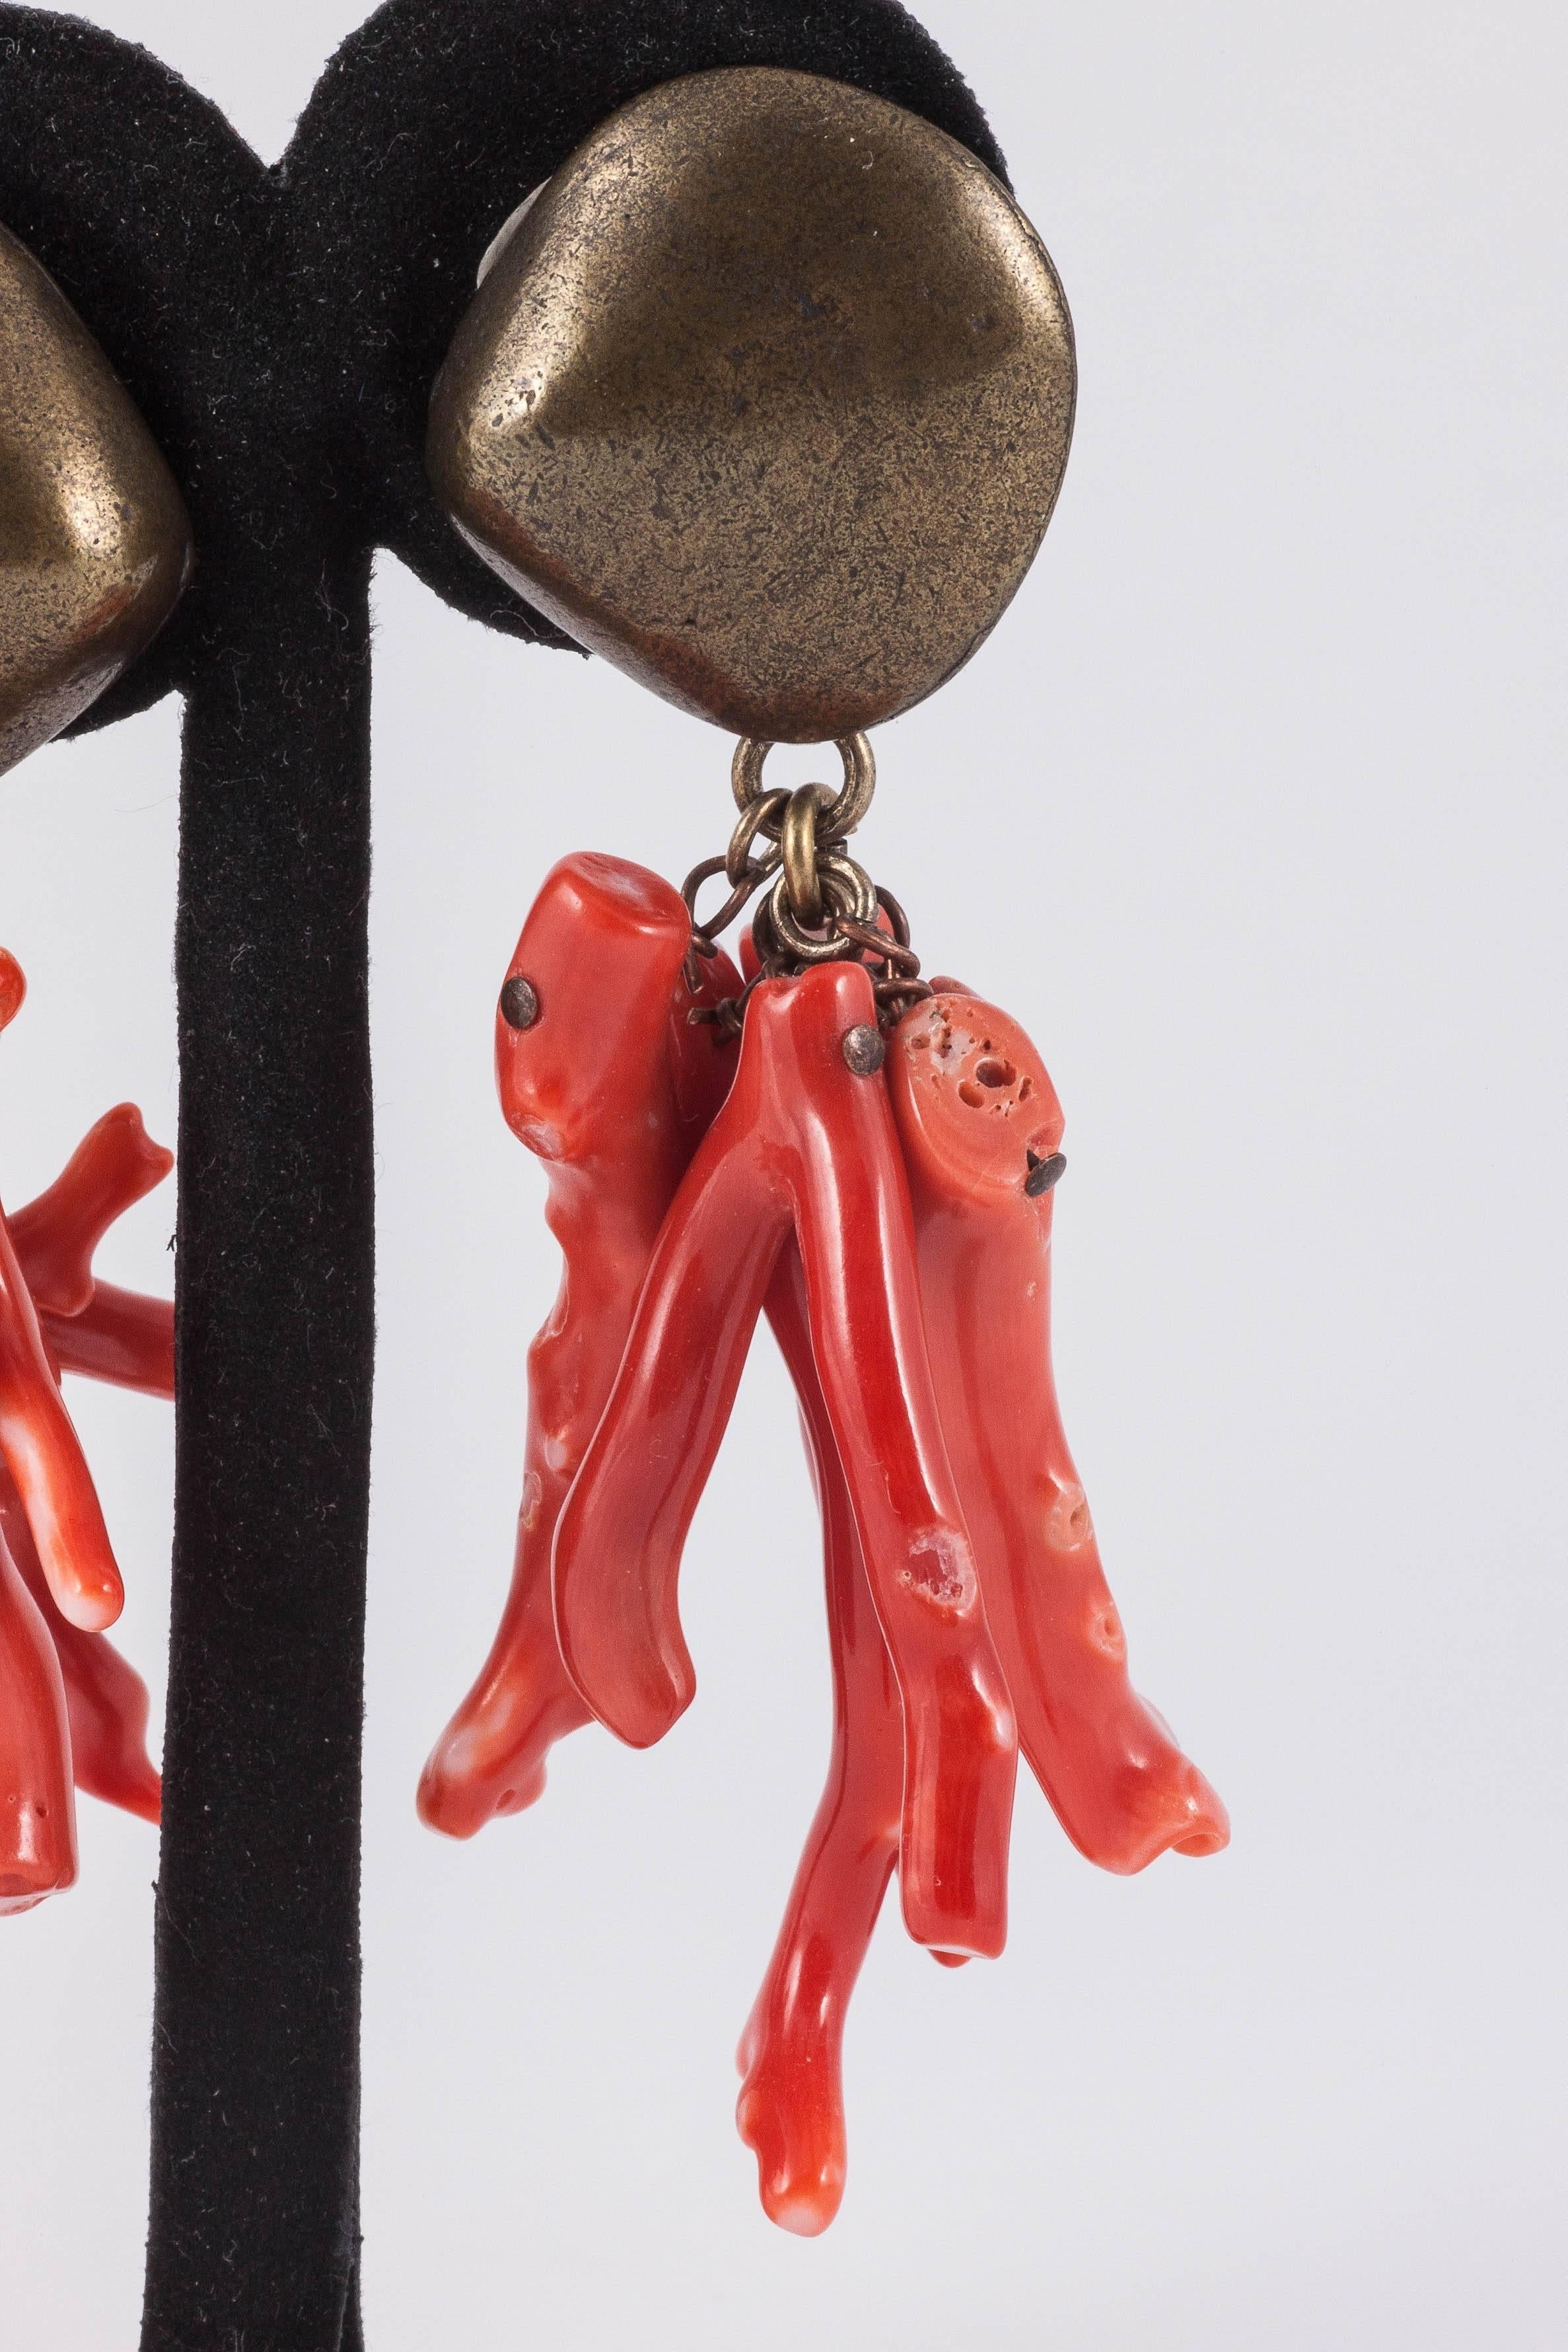 Signed (but illegible) sophisticated Summer drop earrings, featuring bronzed shell clips and large good colour branch coral drops. Very St Tropez, with a black bikini and a Kaftan. They have a strong sculptural quality, which would also work well